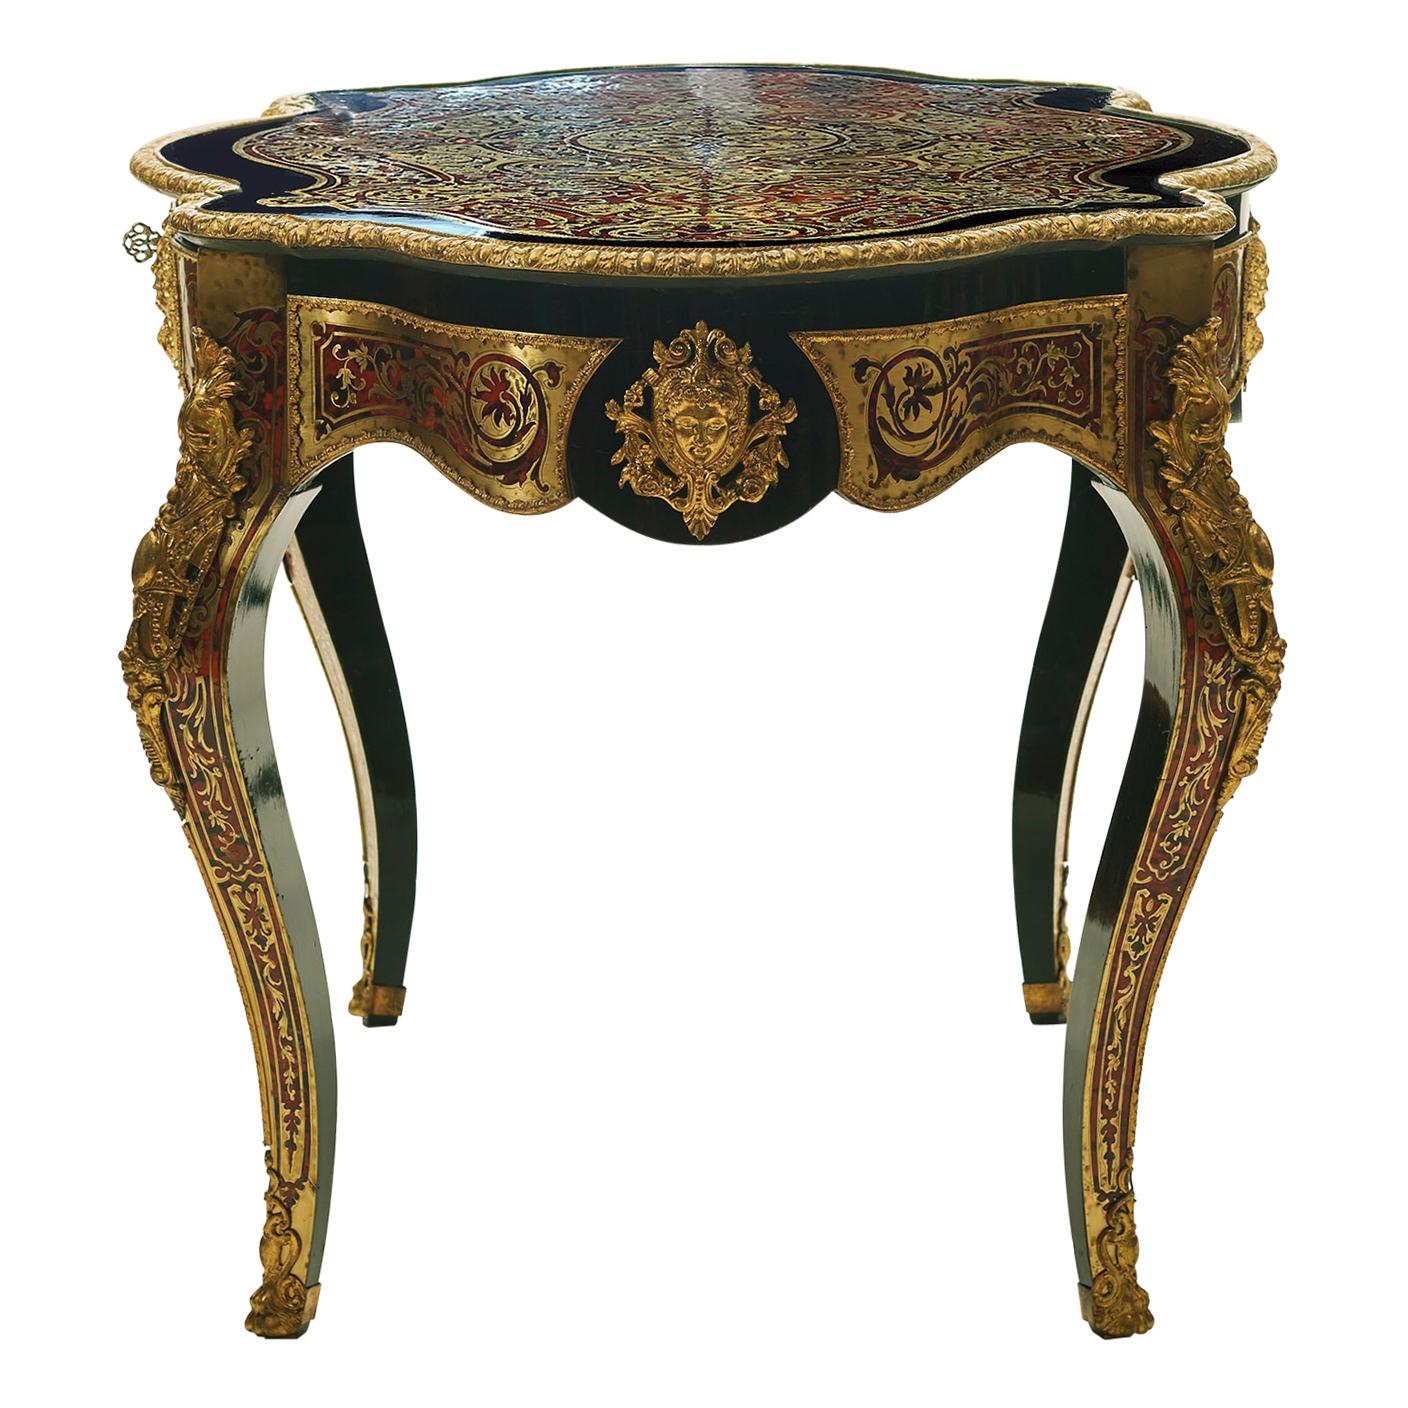 French Napoleon III Table in the Manner of Boulle, 19th Century